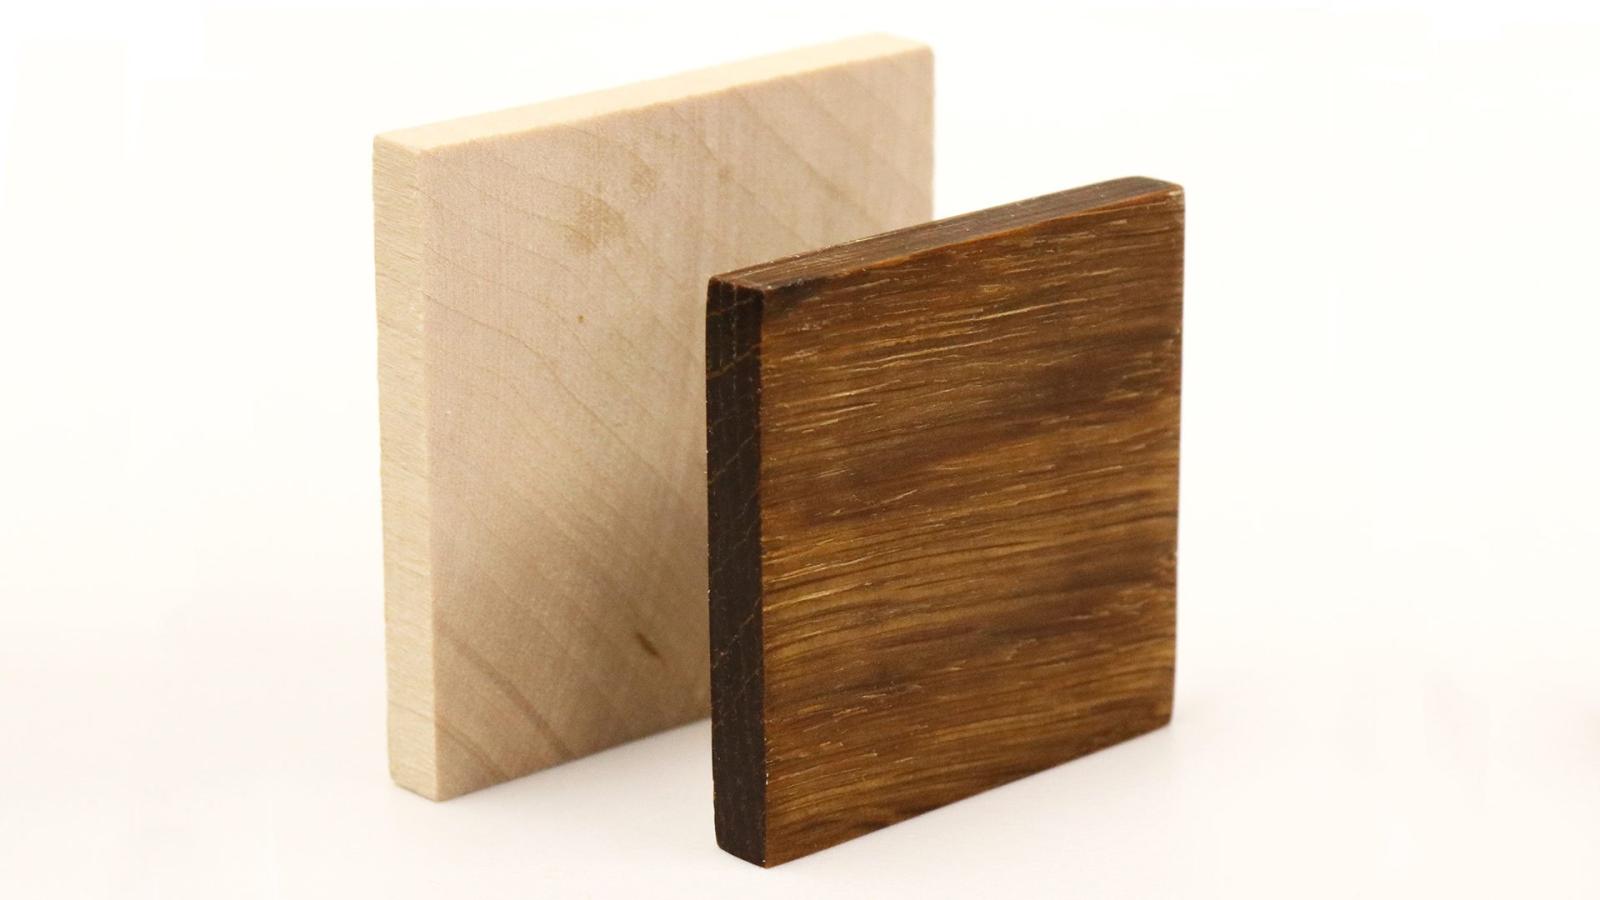 Two types of wood: light and dark